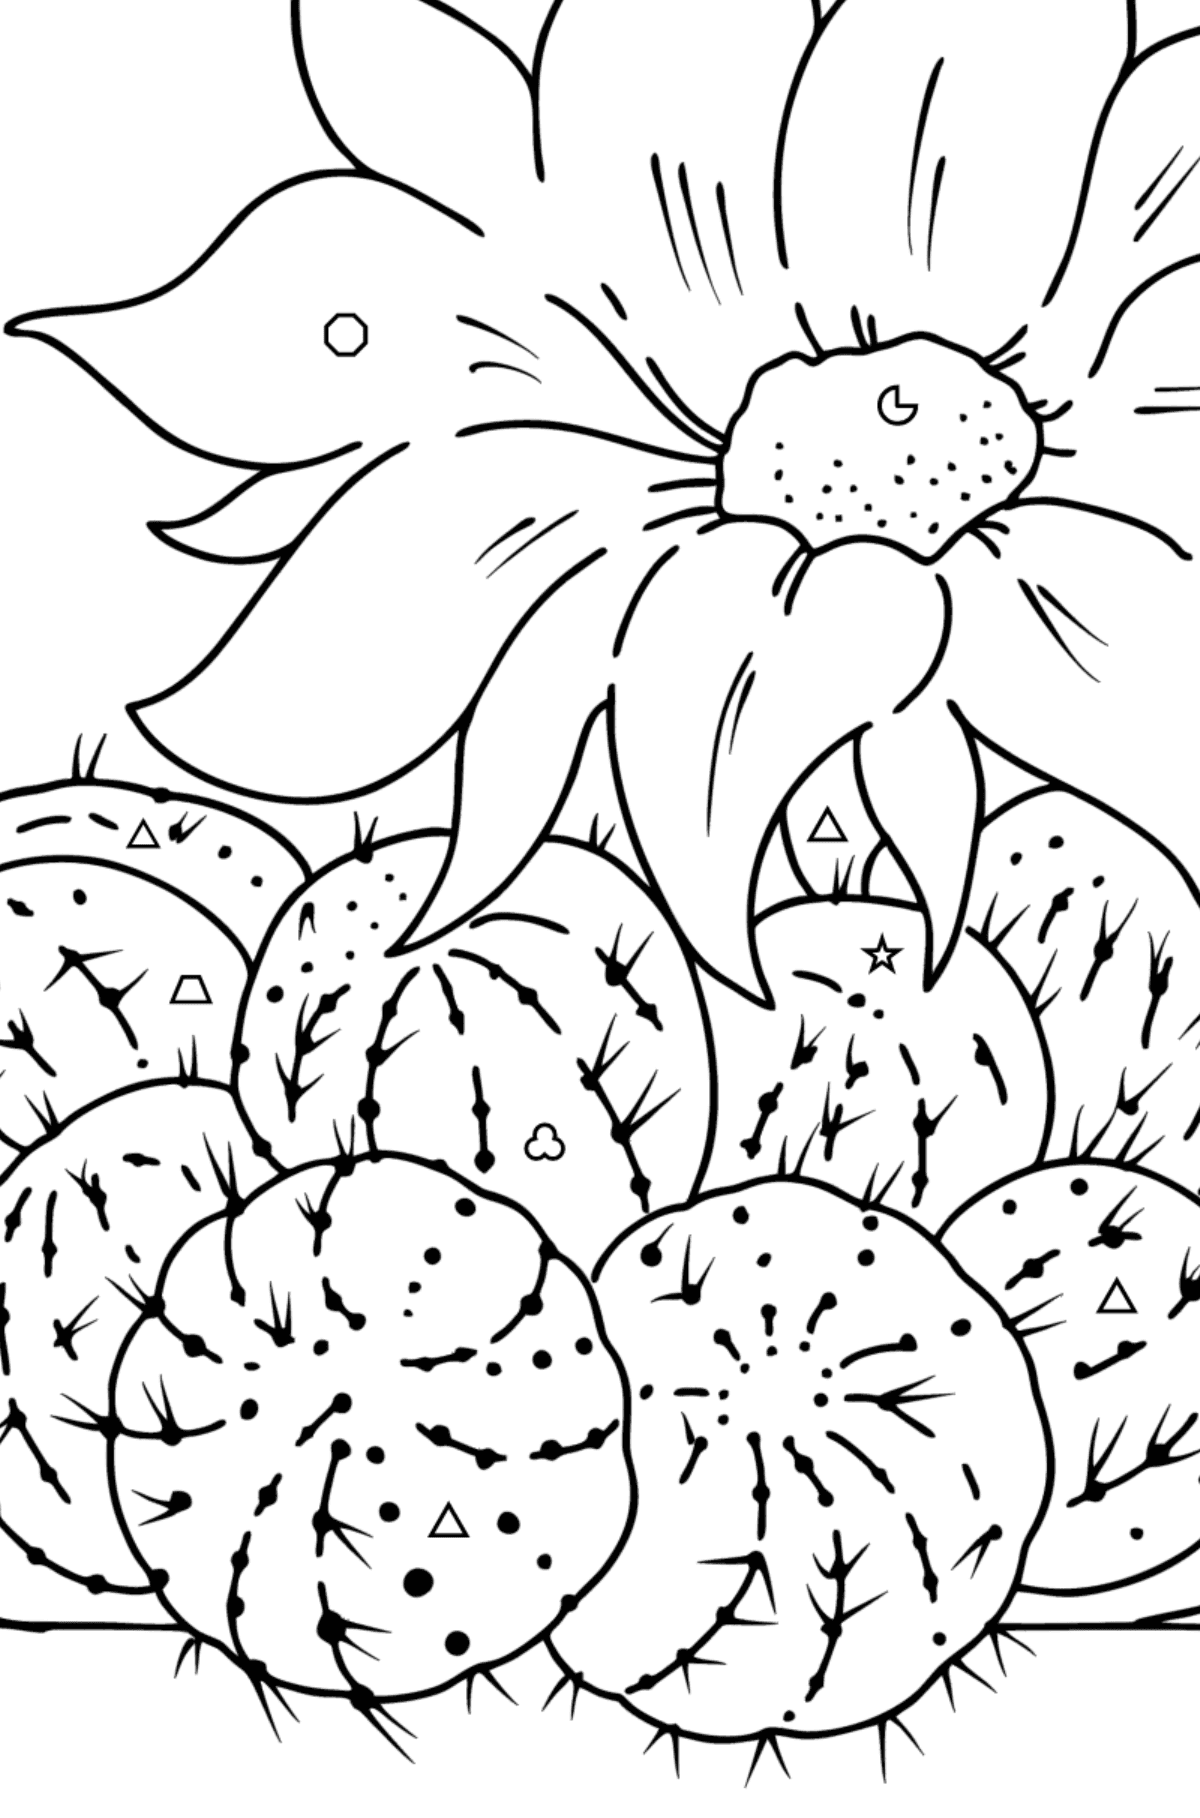 Little Nipple Cactus Coloring page - Coloring by Geometric Shapes for Kids